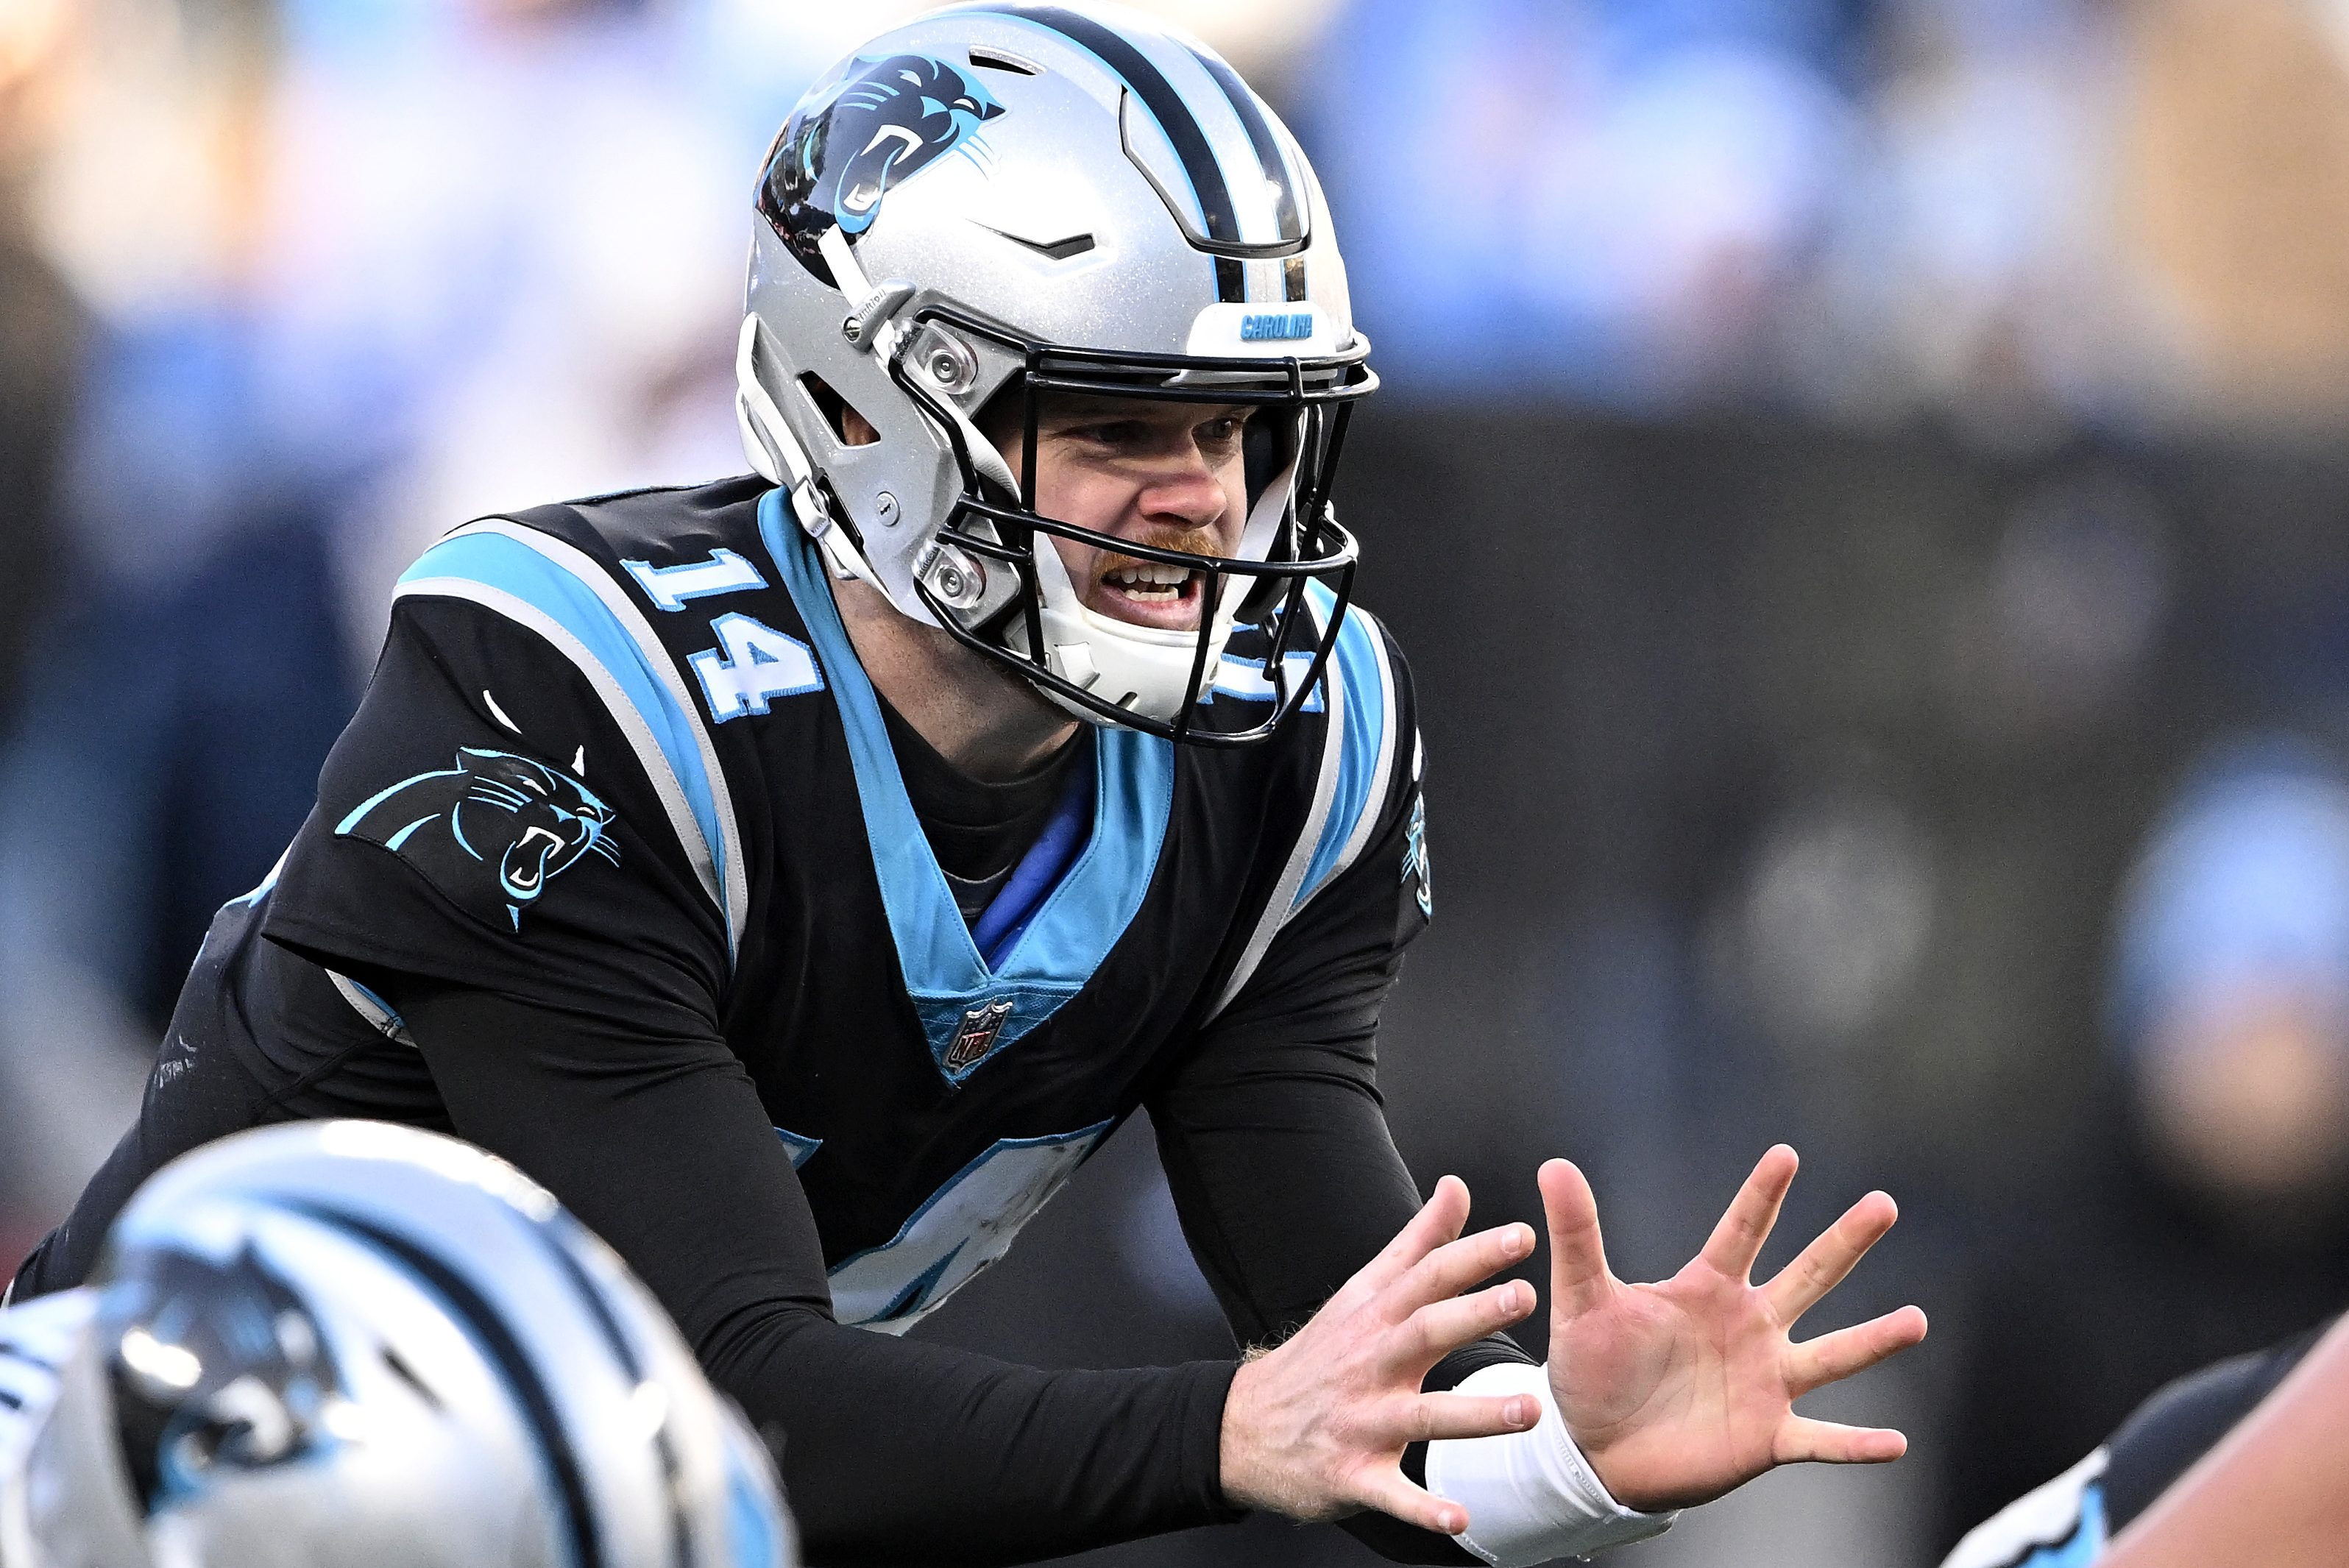 Sam Darnold's Panthers return is still very much a mystery